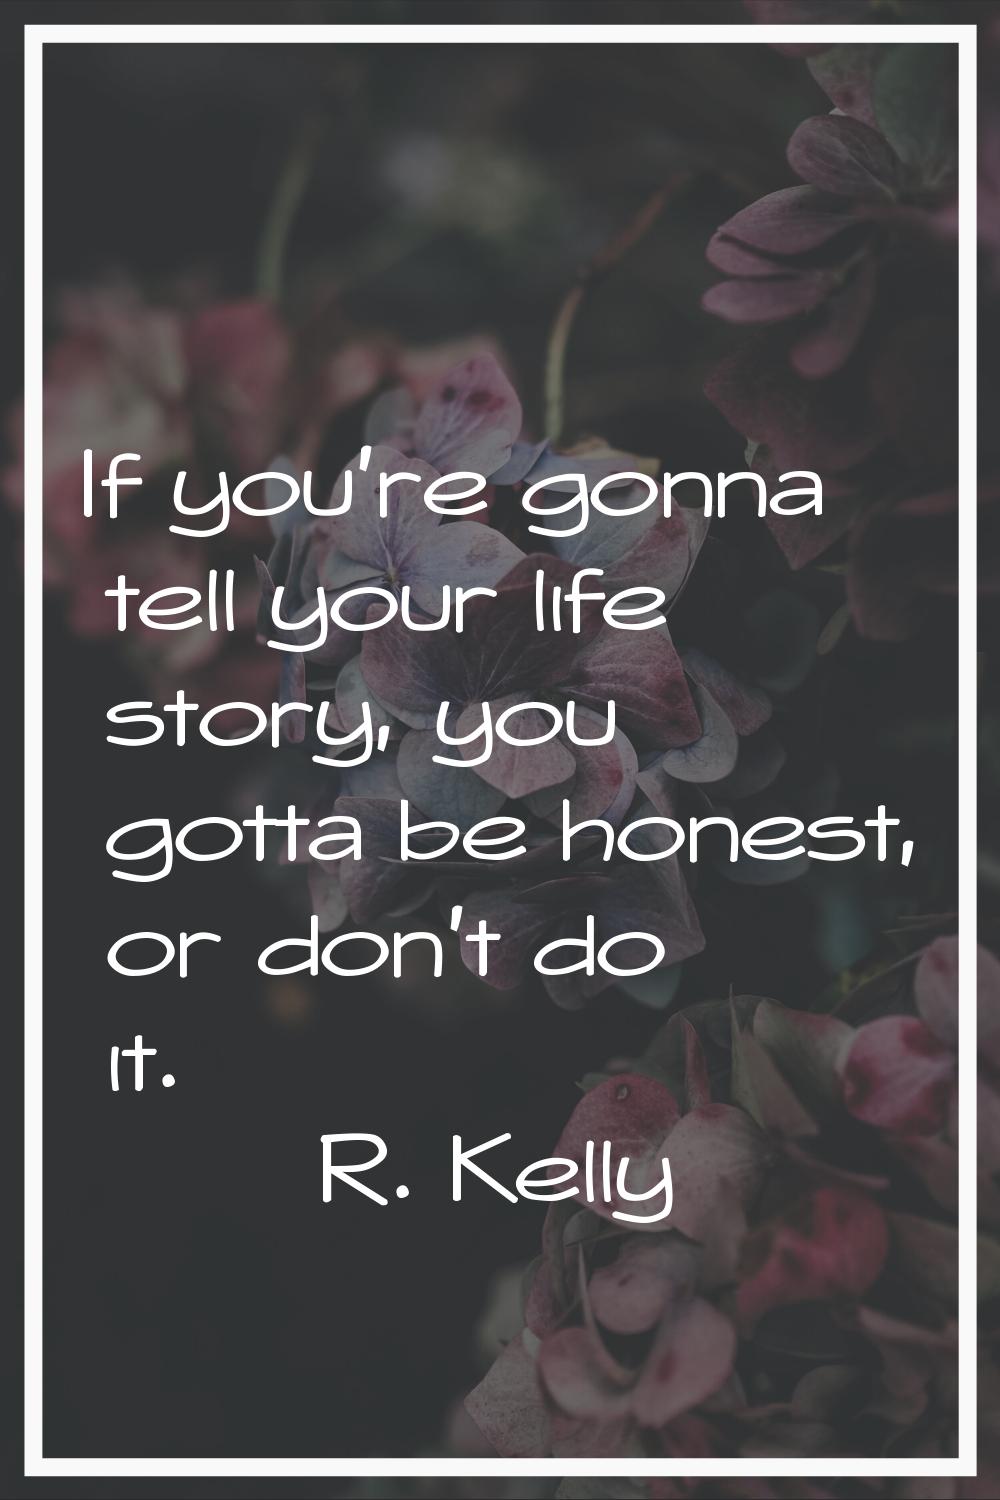 If you're gonna tell your life story, you gotta be honest, or don't do it.